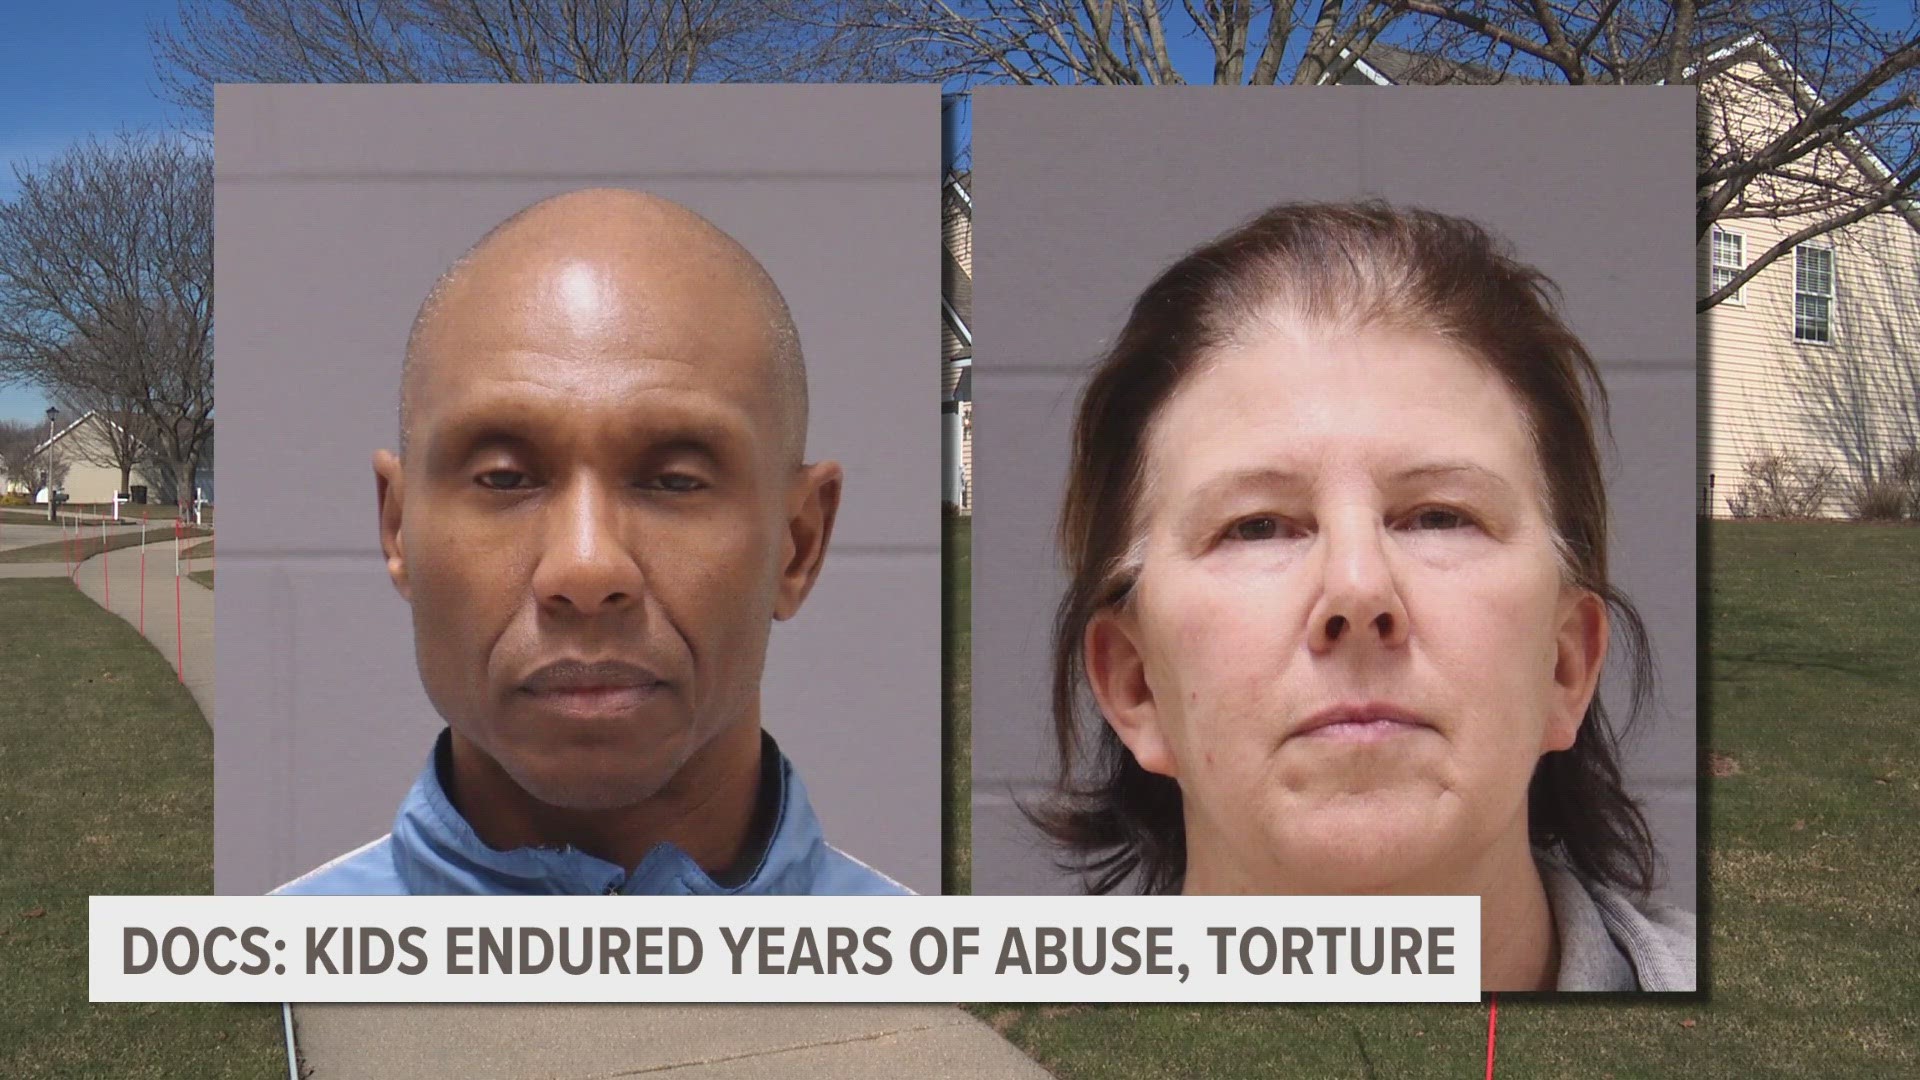 The children were subjected to wearing dog collars, forced to eat dog food and oatmeal with hot sauce, and also faced physical abuse inside the home for years.